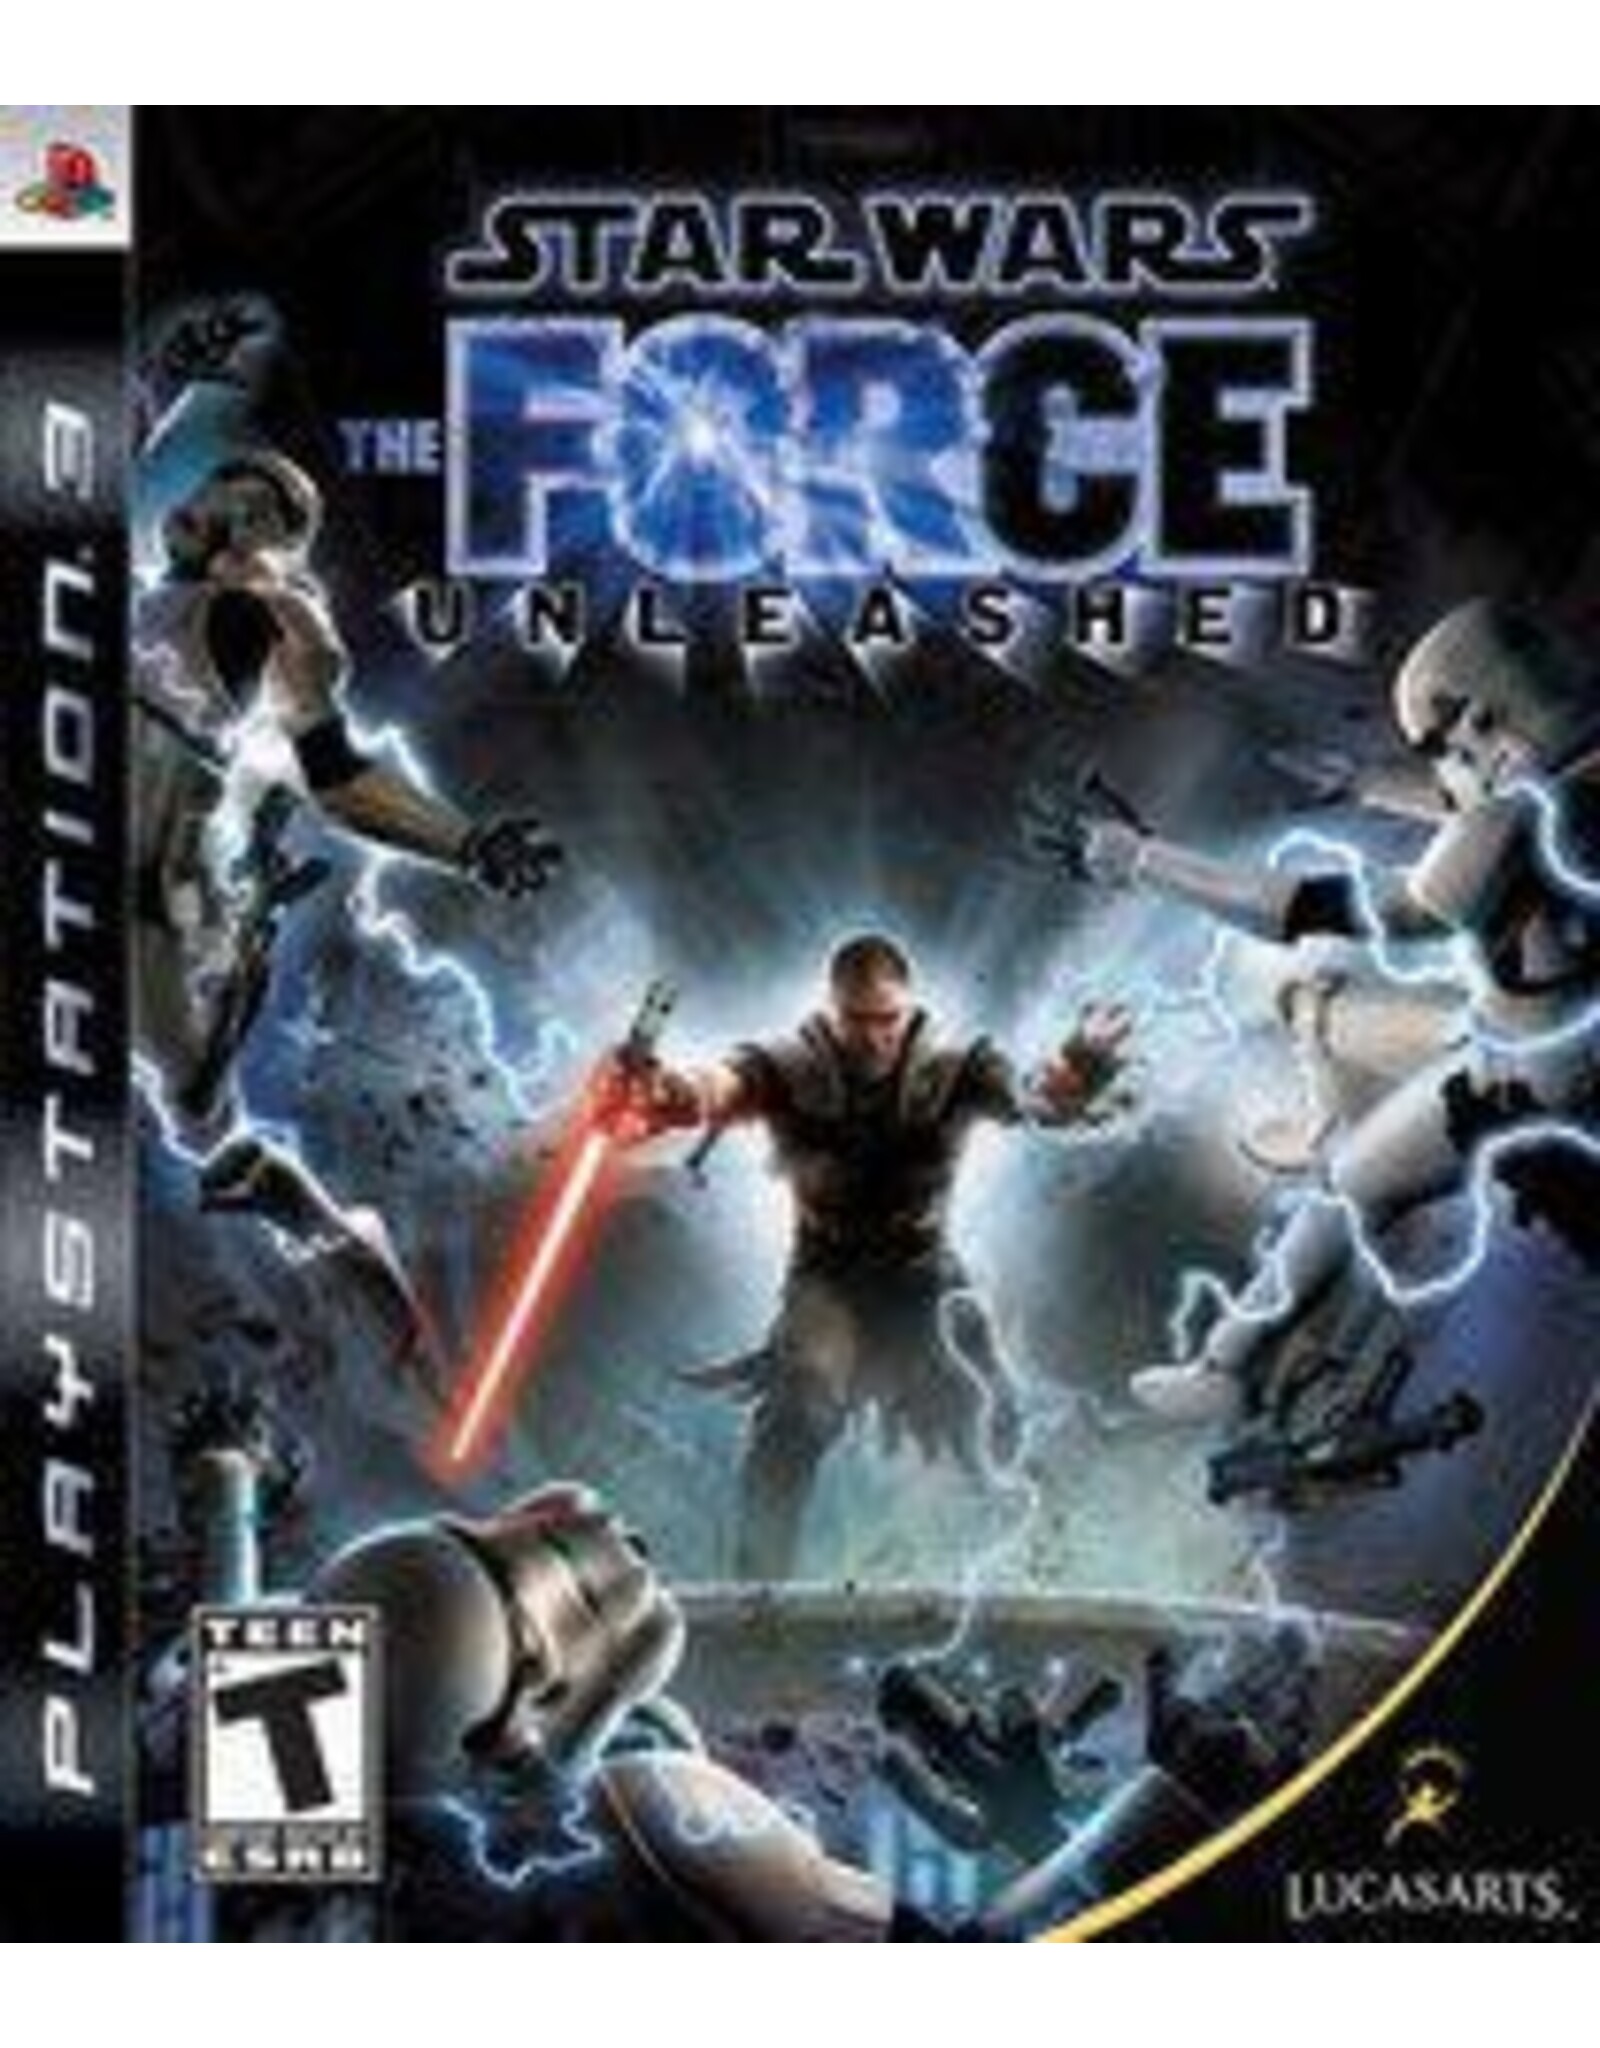 Playstation 3 Star Wars The Force Unleashed (CiB)